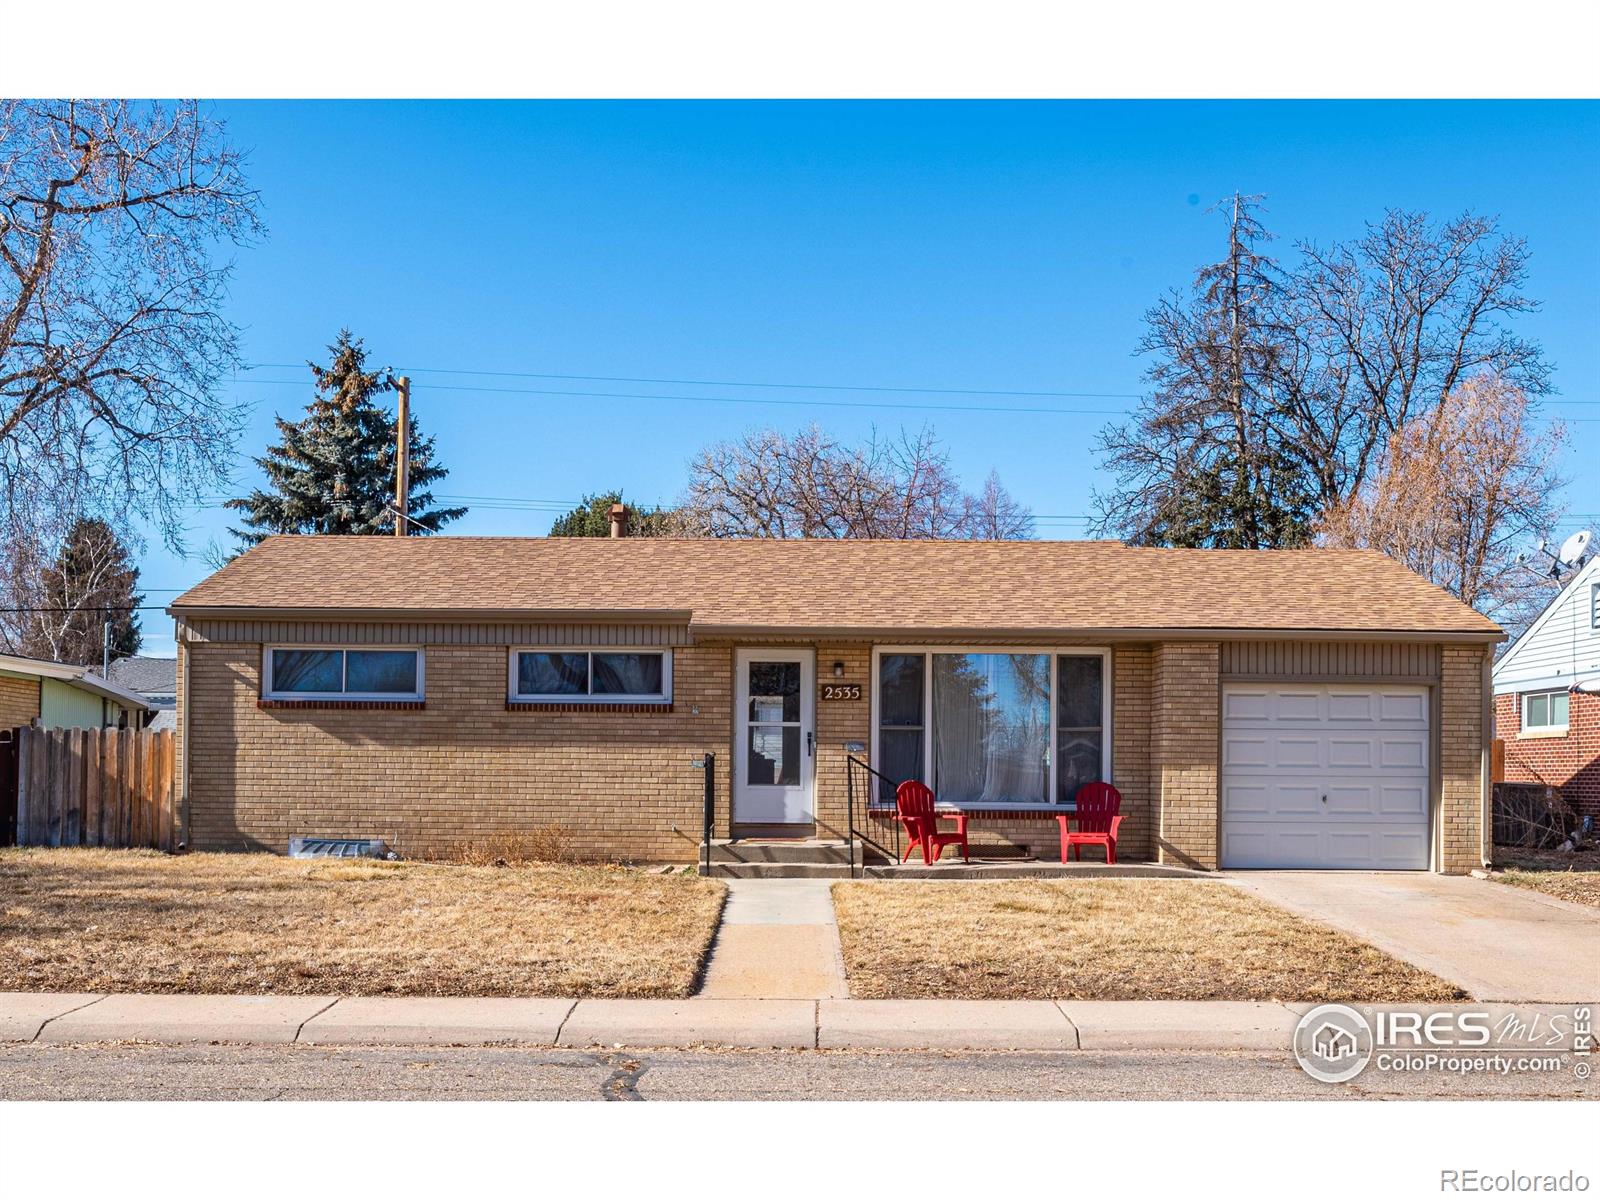 2535  14th Avenue, greeley MLS: 4567891002640 Beds: 4 Baths: 1 Price: $381,900